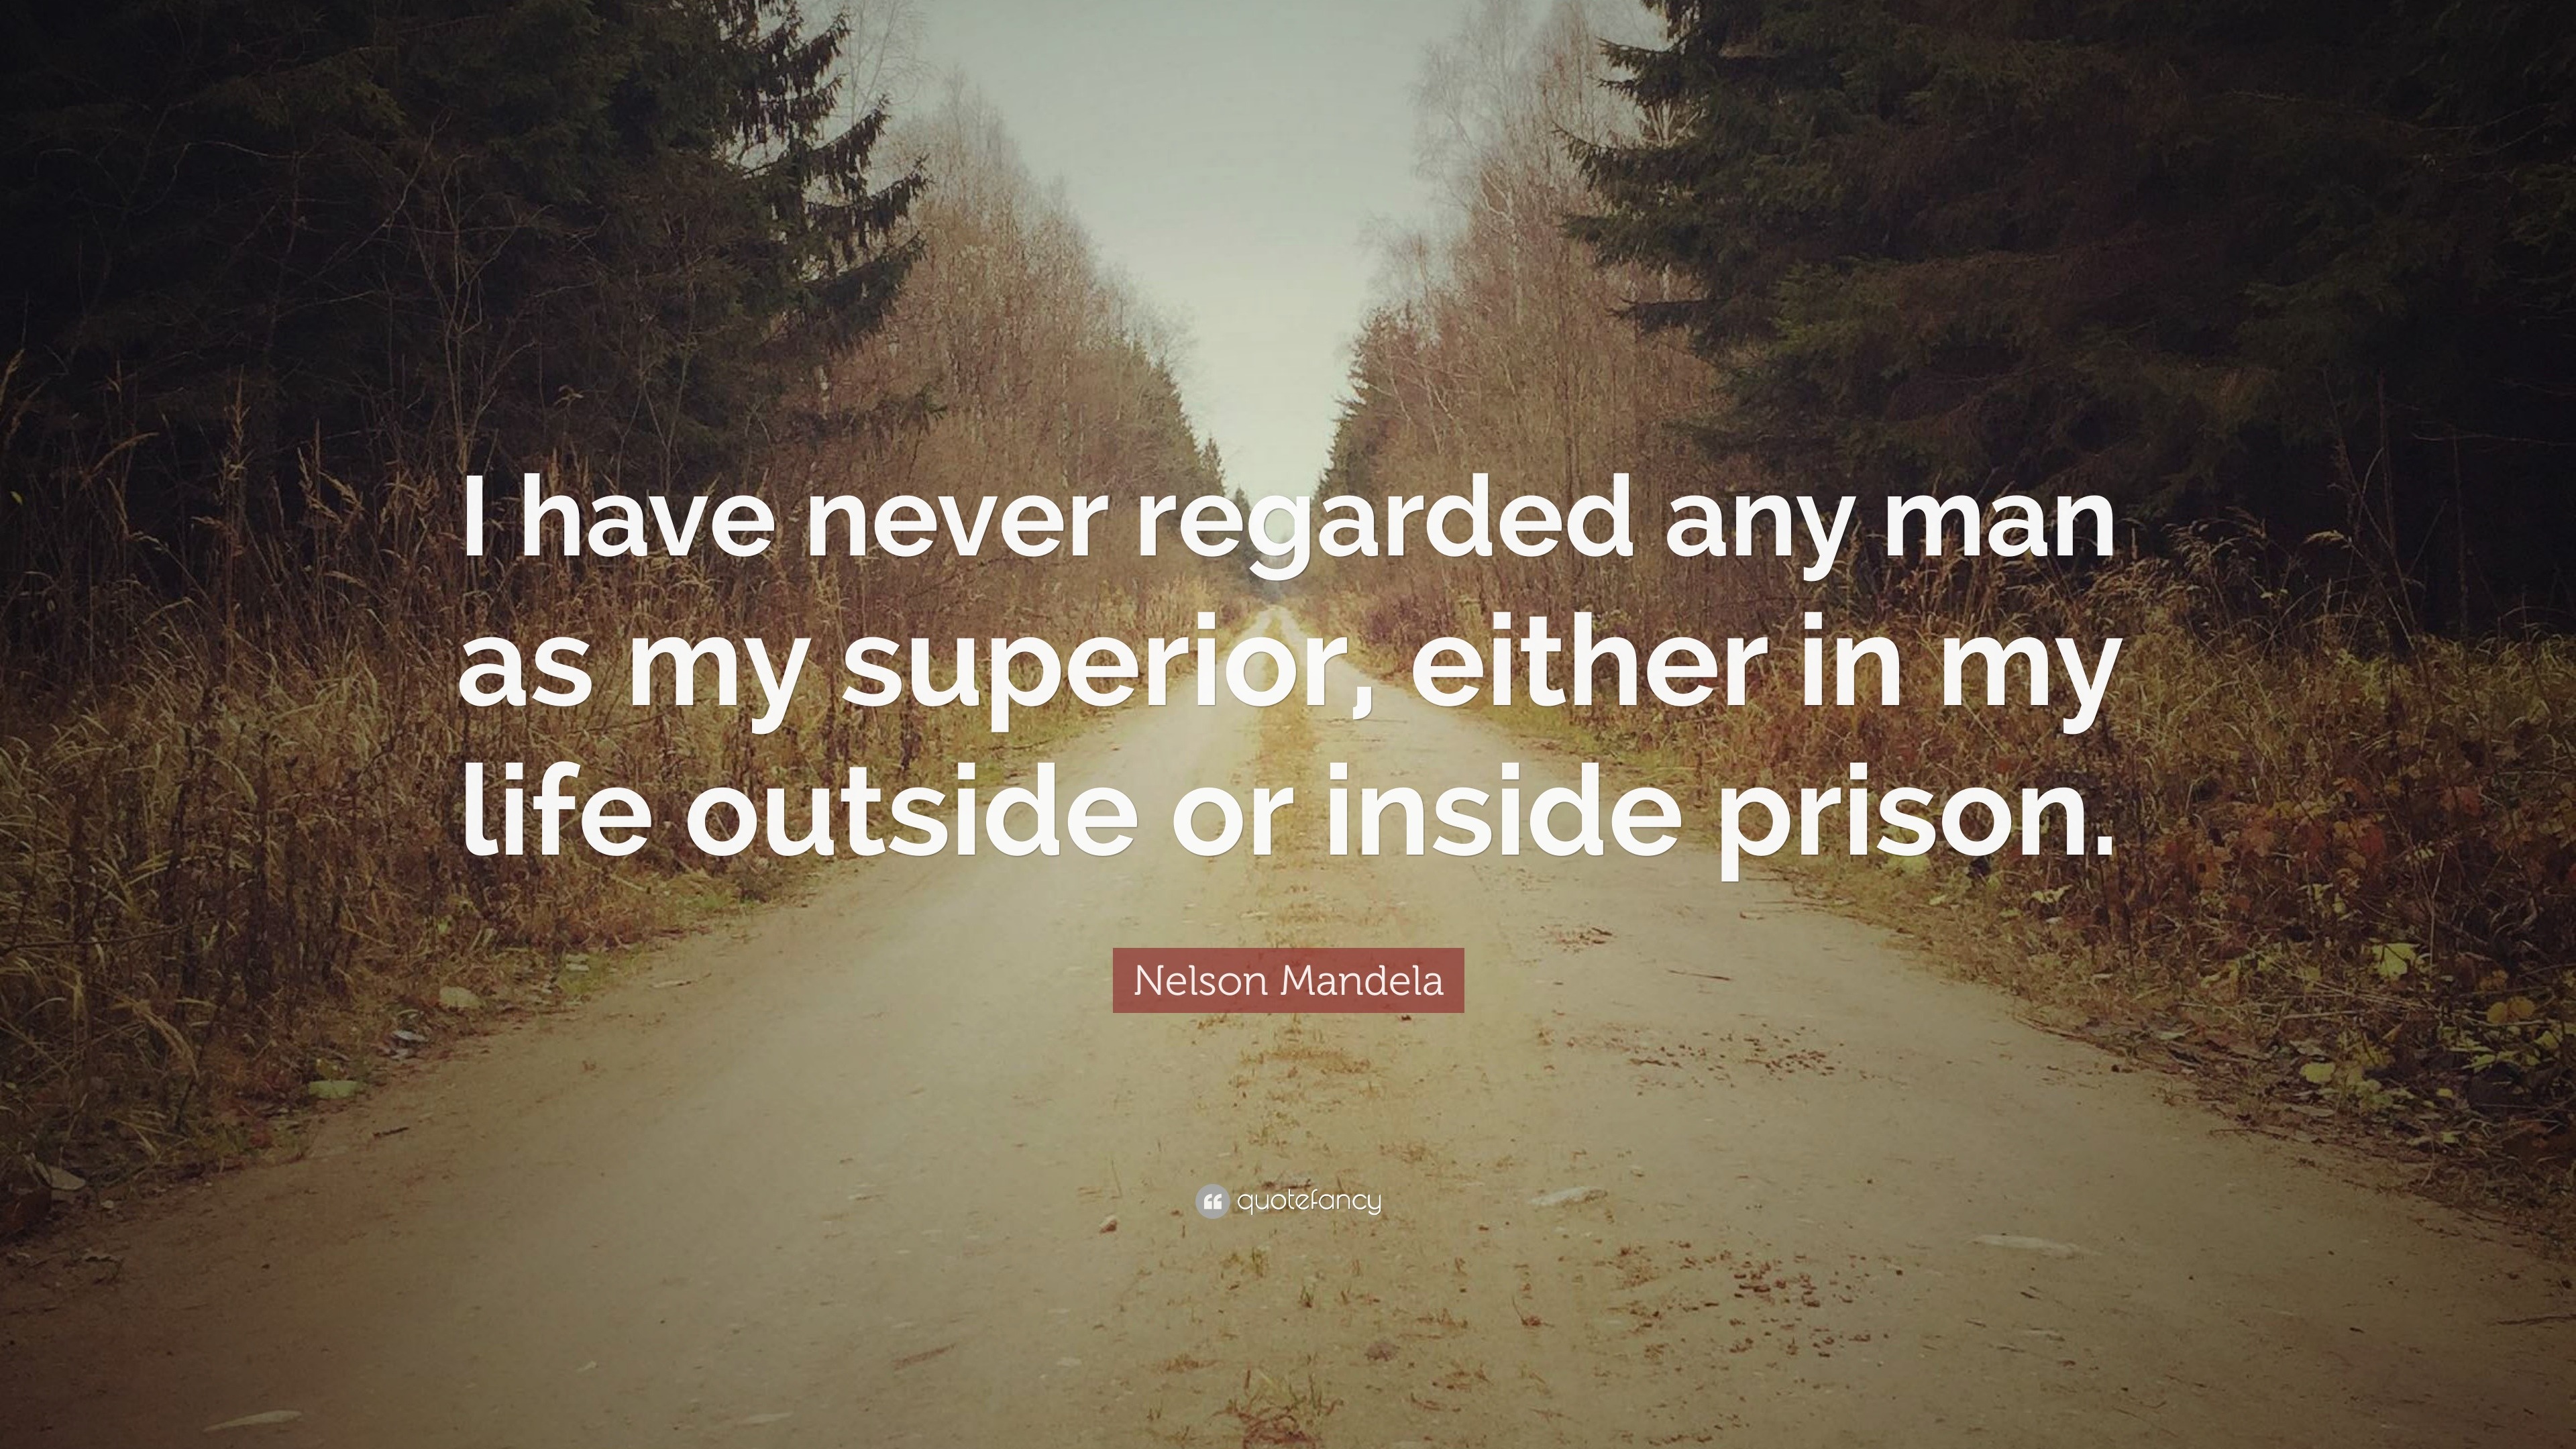 Nelson Mandela Quote: “I have never regarded any man as my superior